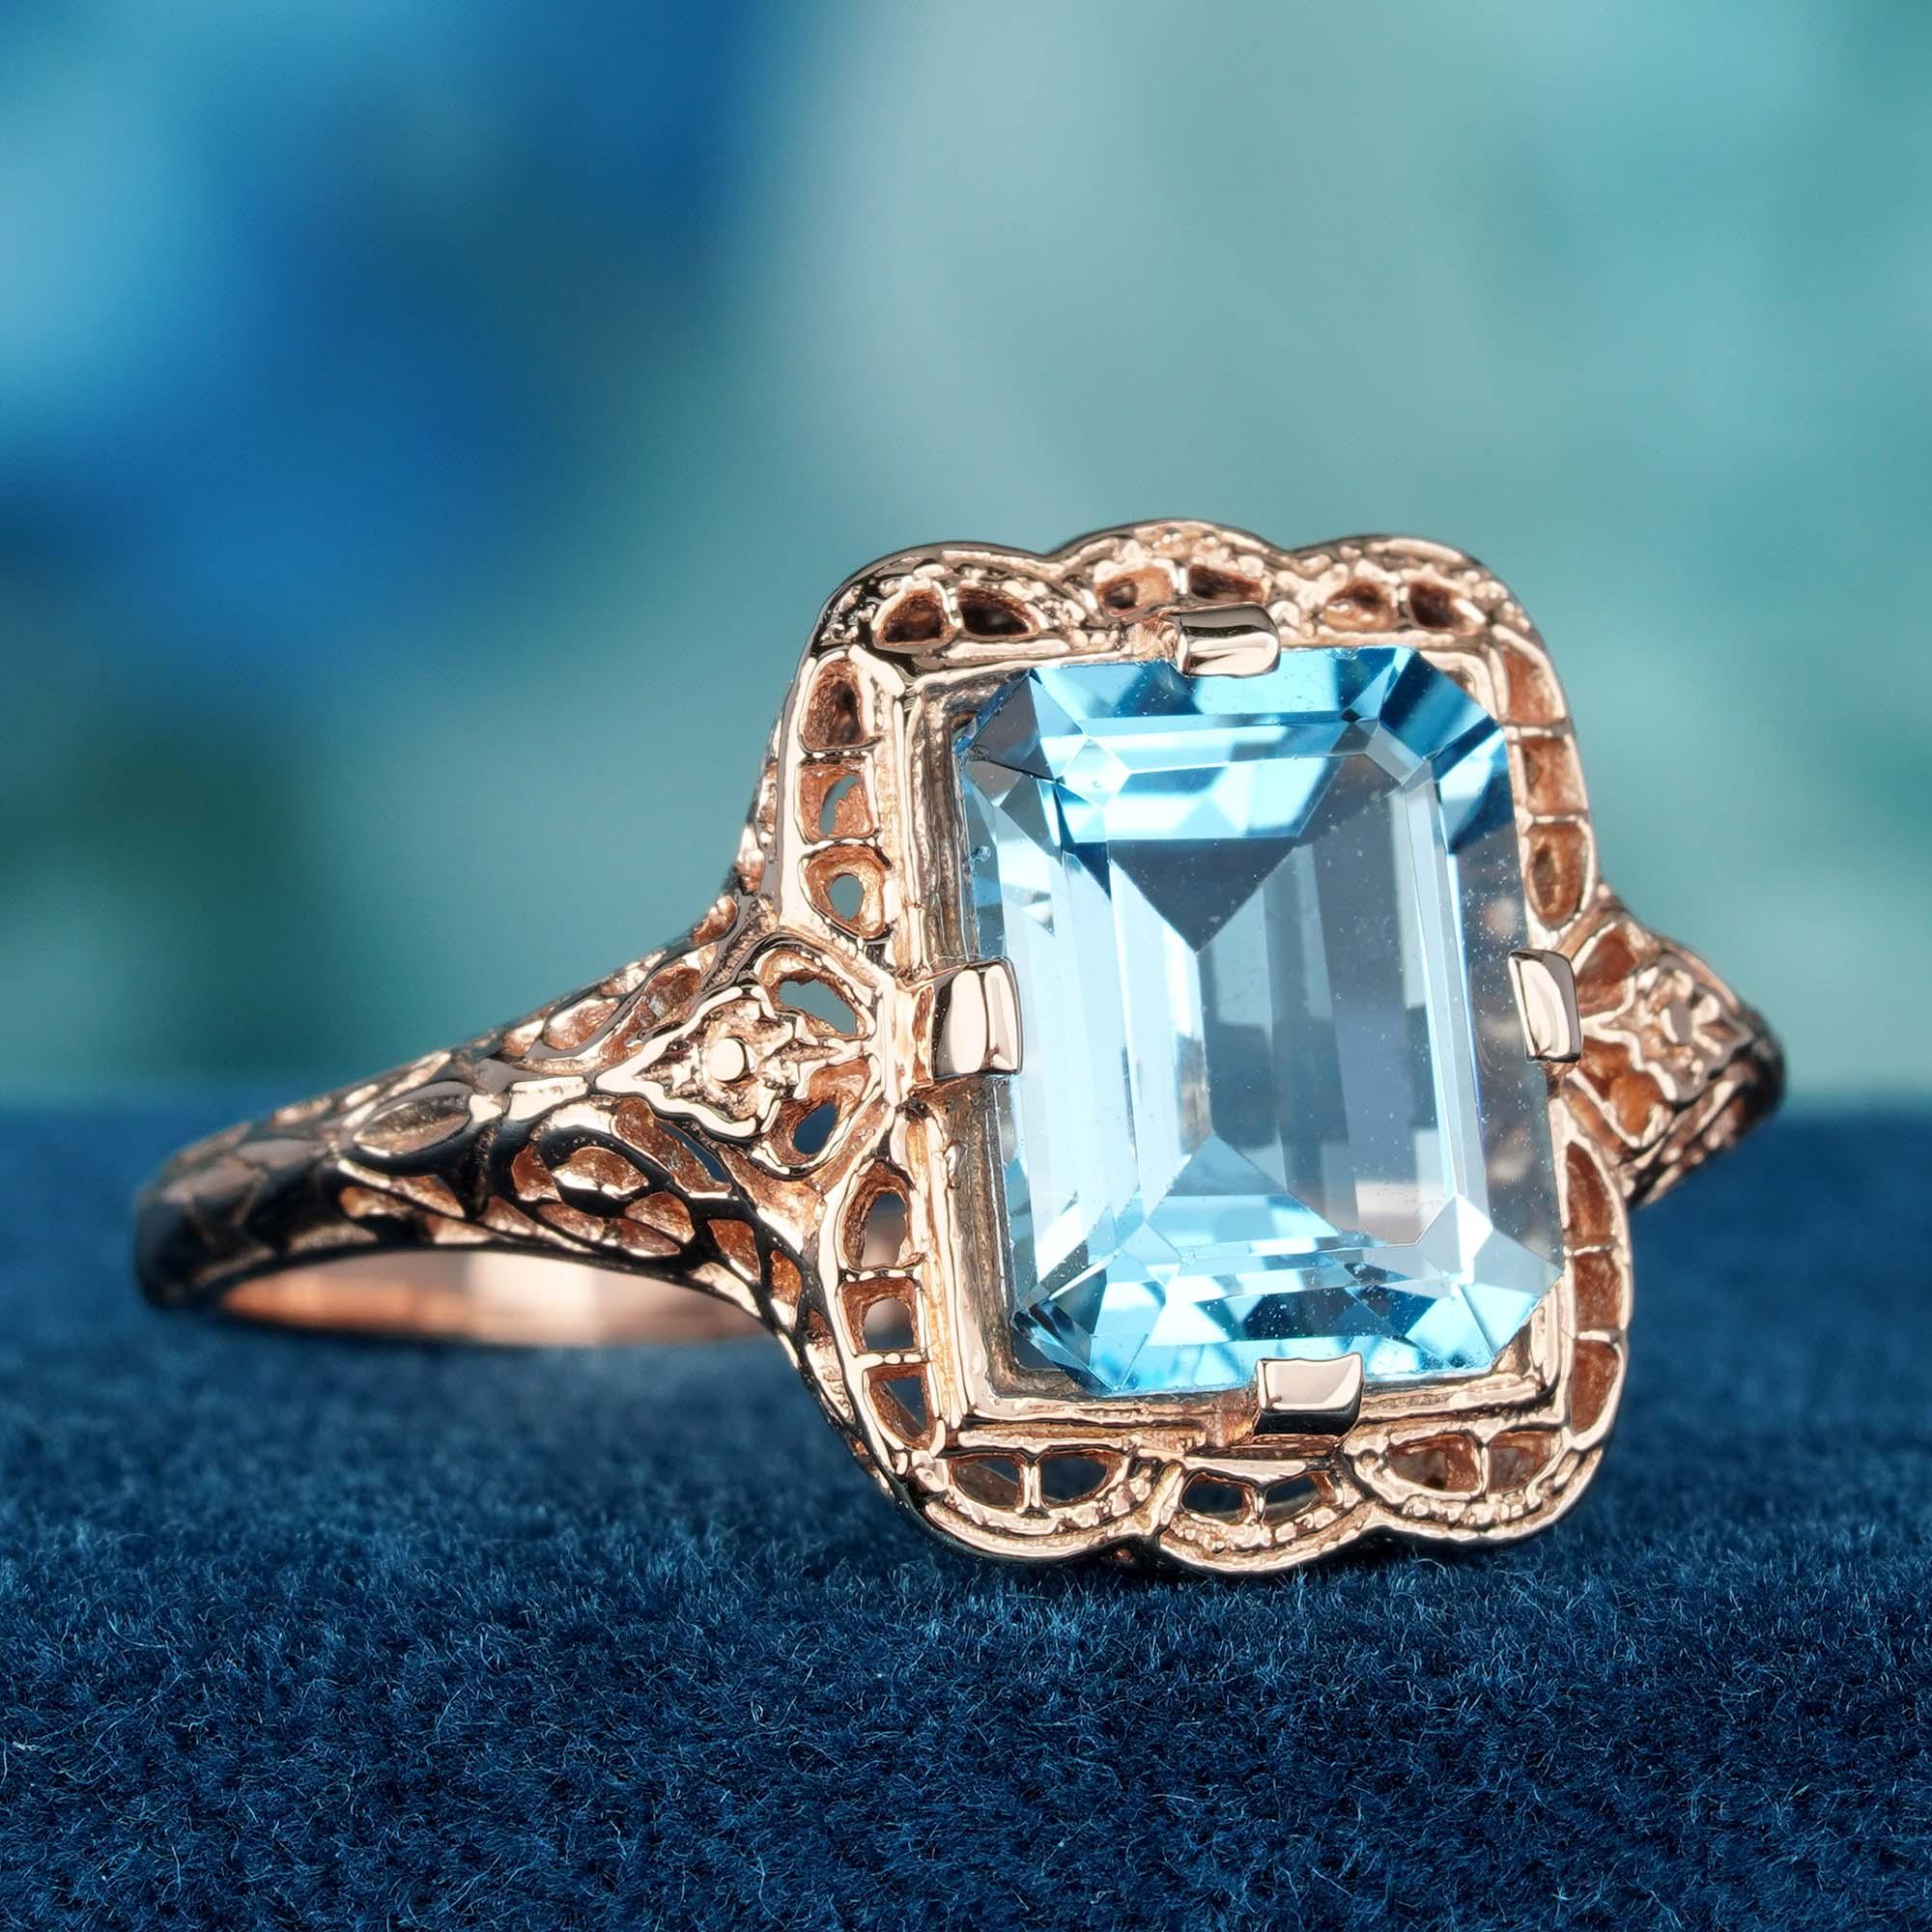 Introducing our exquisite ring, crafted in with stunning piece features a solid rose gold band, offering both elegance and durability. Adorned with a captivating Natural Blue Topaz as the primary stone, boasting an impressive 4.50 carats in a